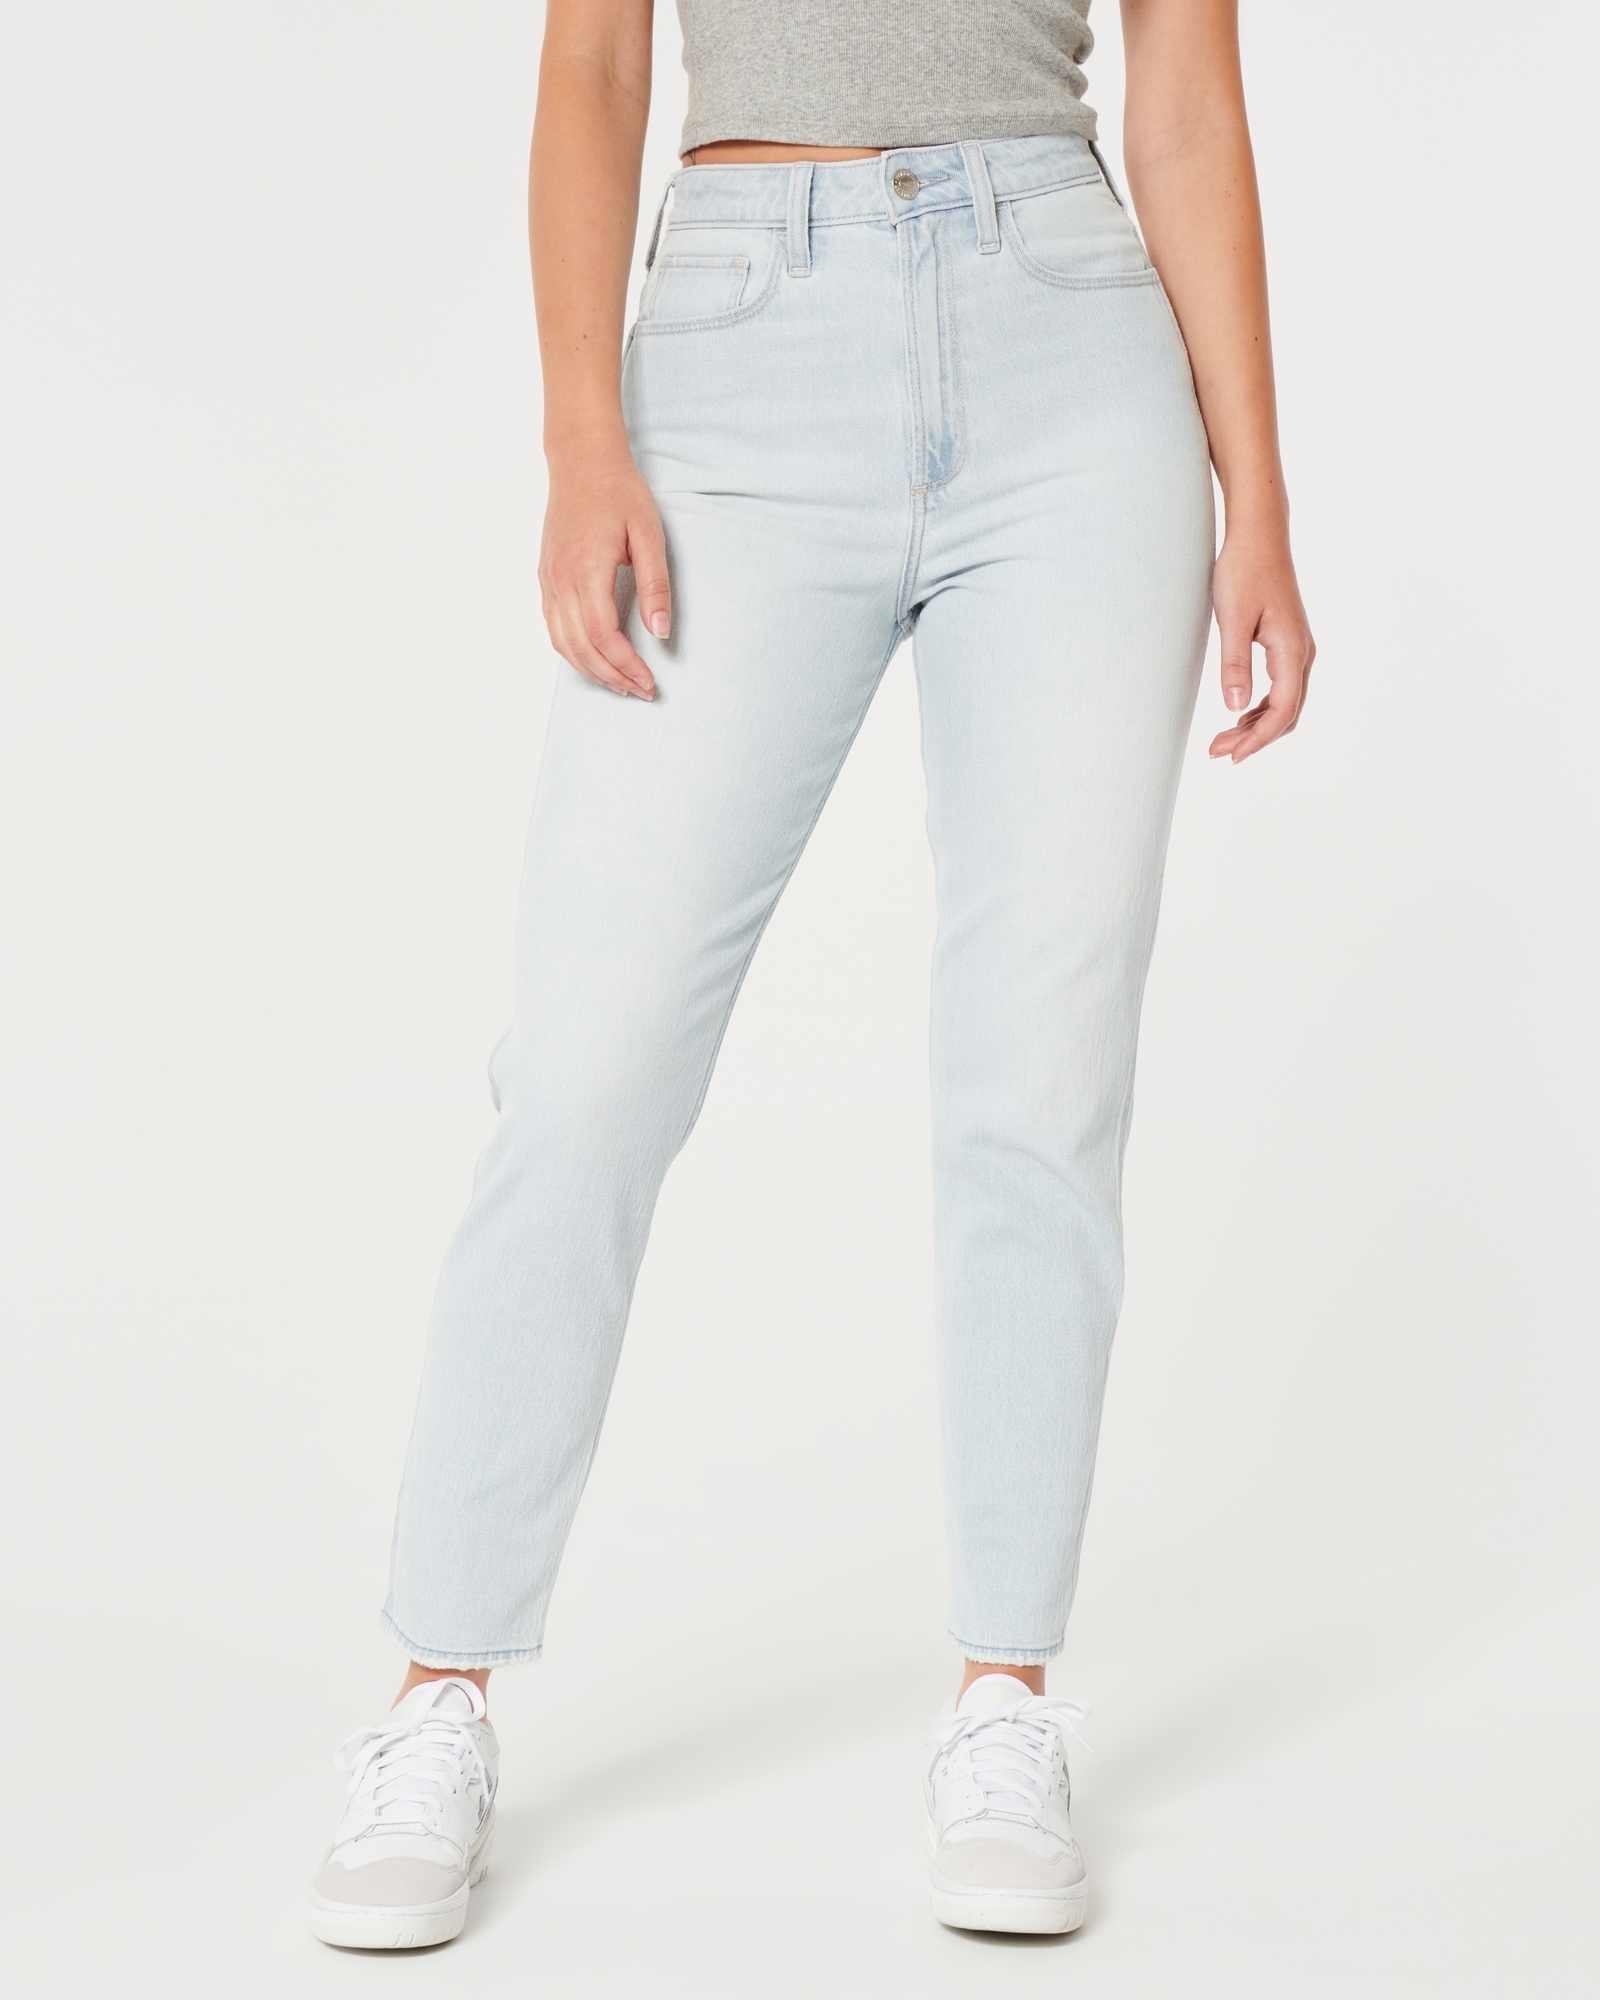 Hollister Ripped Curvy Ultra High Rise Jean Jeggings Women 5R